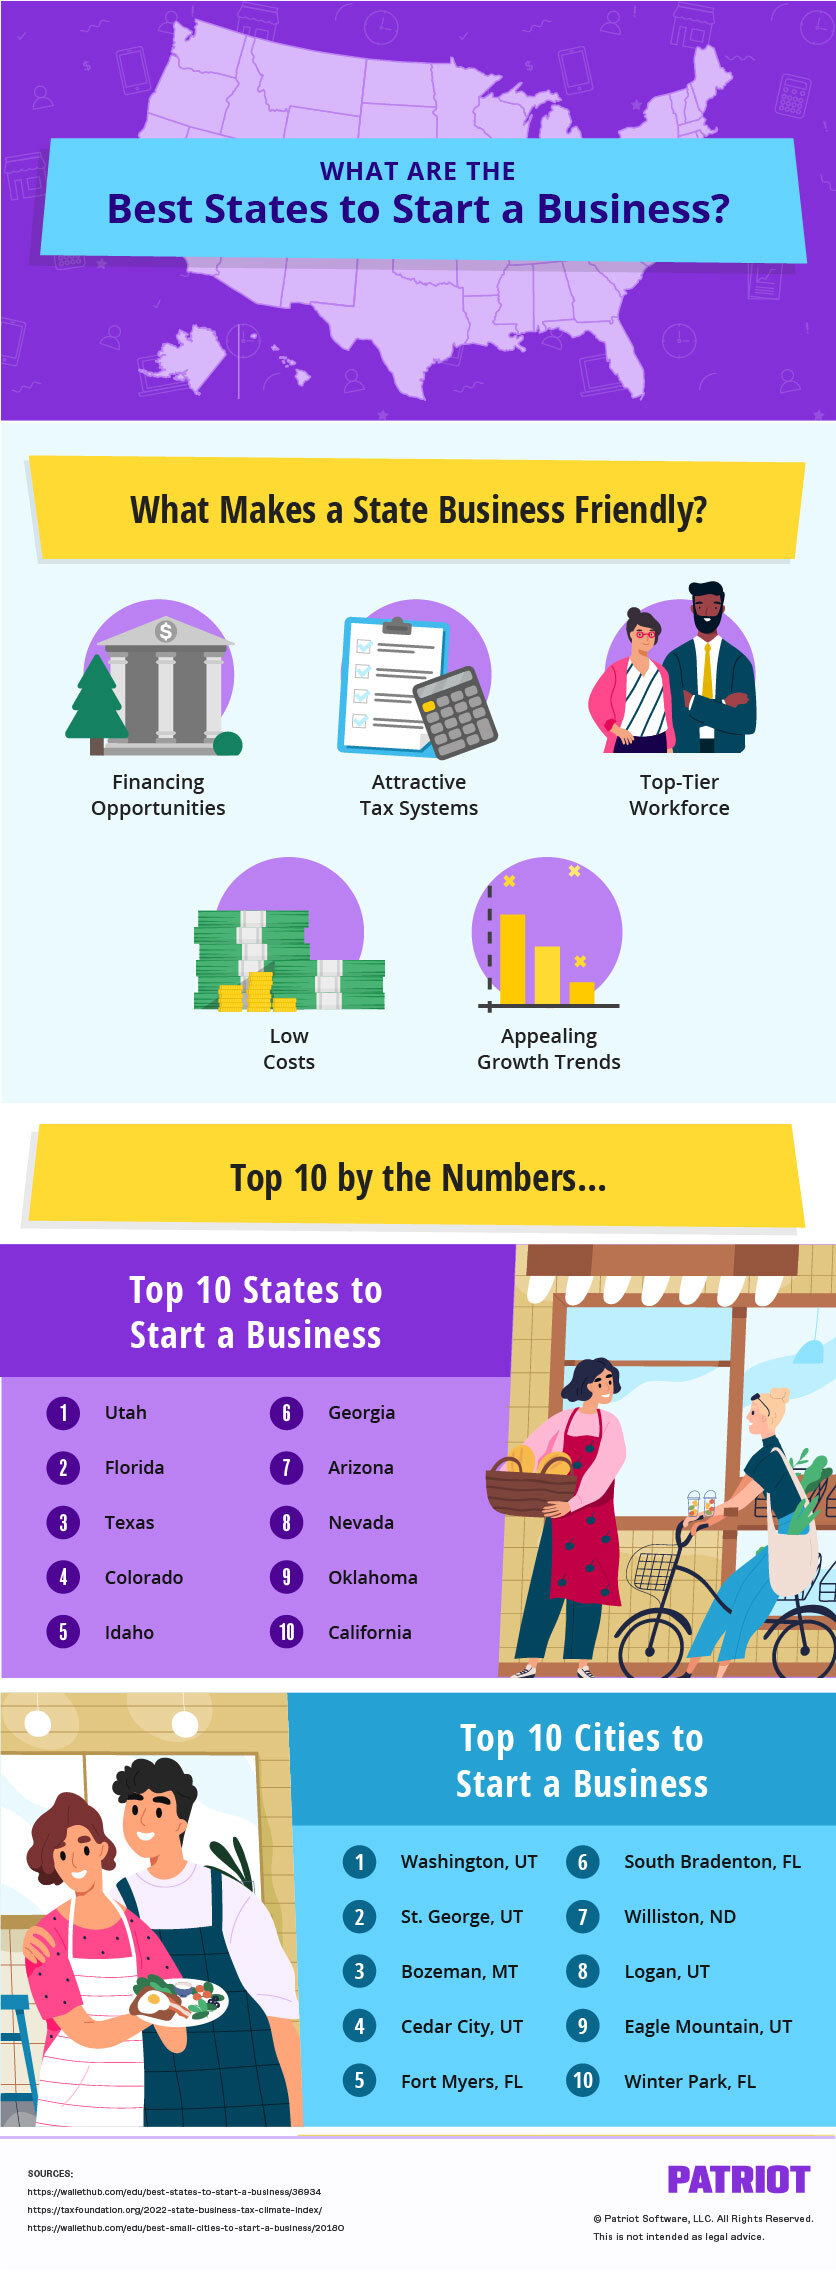 Infographic detailing the best states and cities to start a business according to financing opportunities, tax systems, workforce, costs, and growth trends